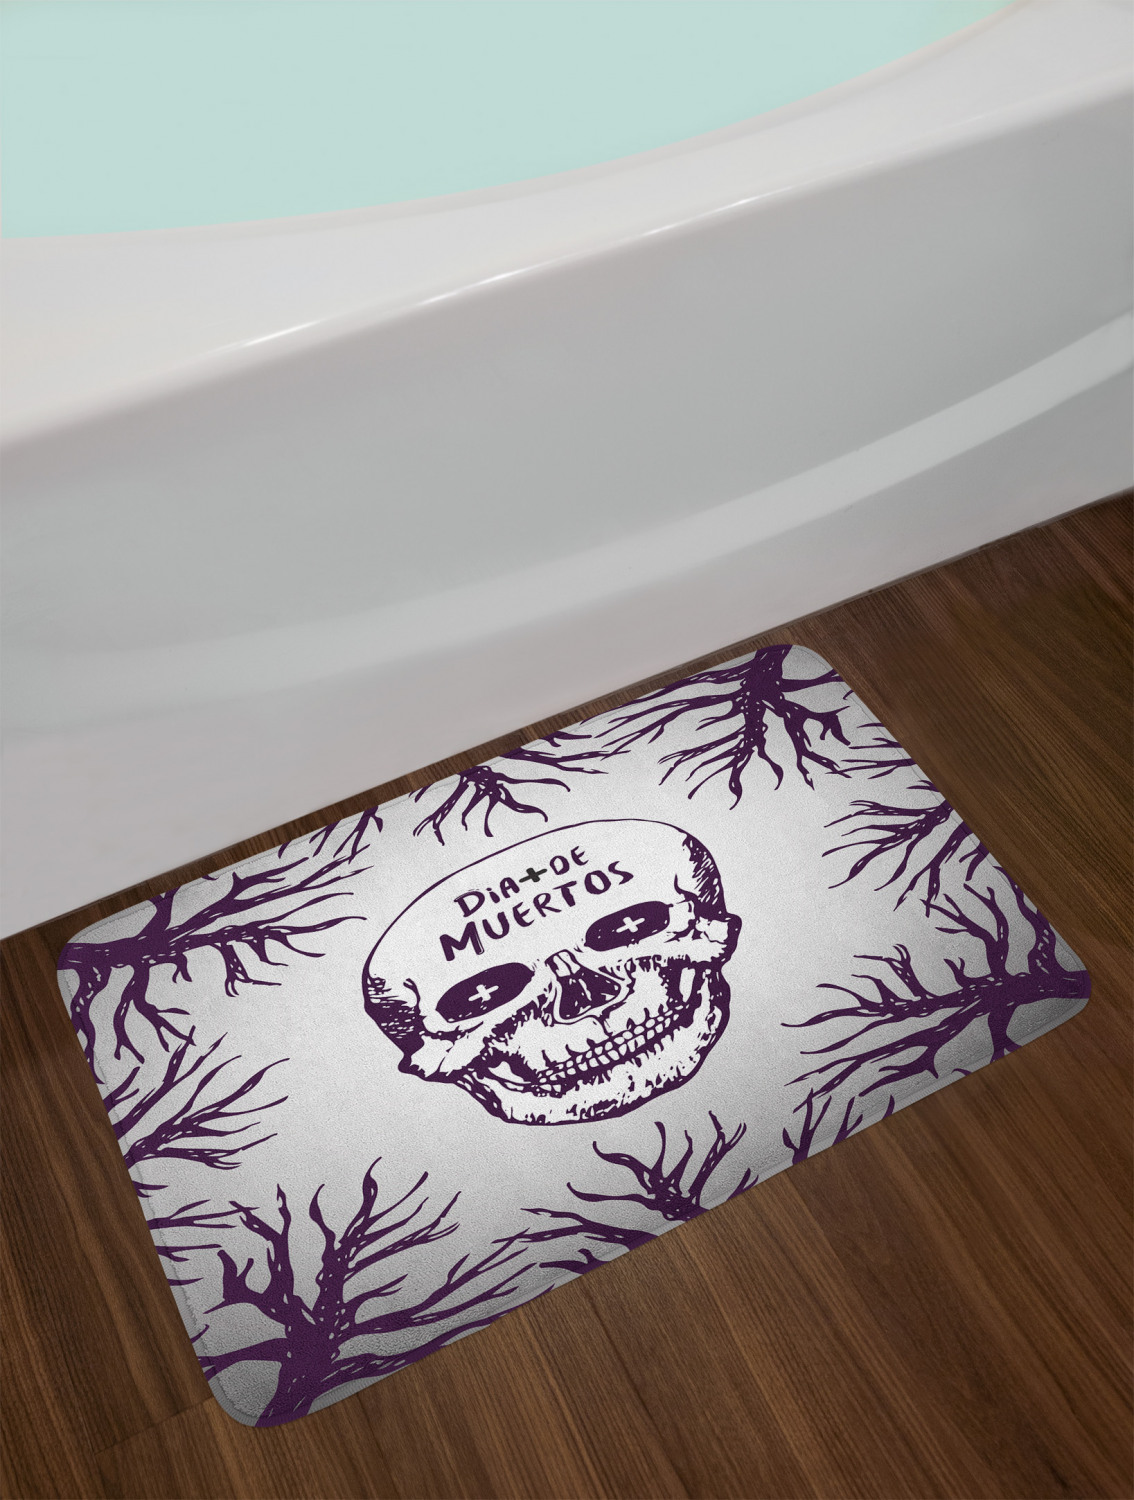 Mexican Bath Mat, Quote with Spooky Skull Head among Tree Branches Calaveral Carnival Holiday Graphic, Non-Slip Plush Mat Bathroom Kitchen Laundry Room Decor, 29.5 X 17.5 Inches, Purple, Ambesonne - image 2 of 2